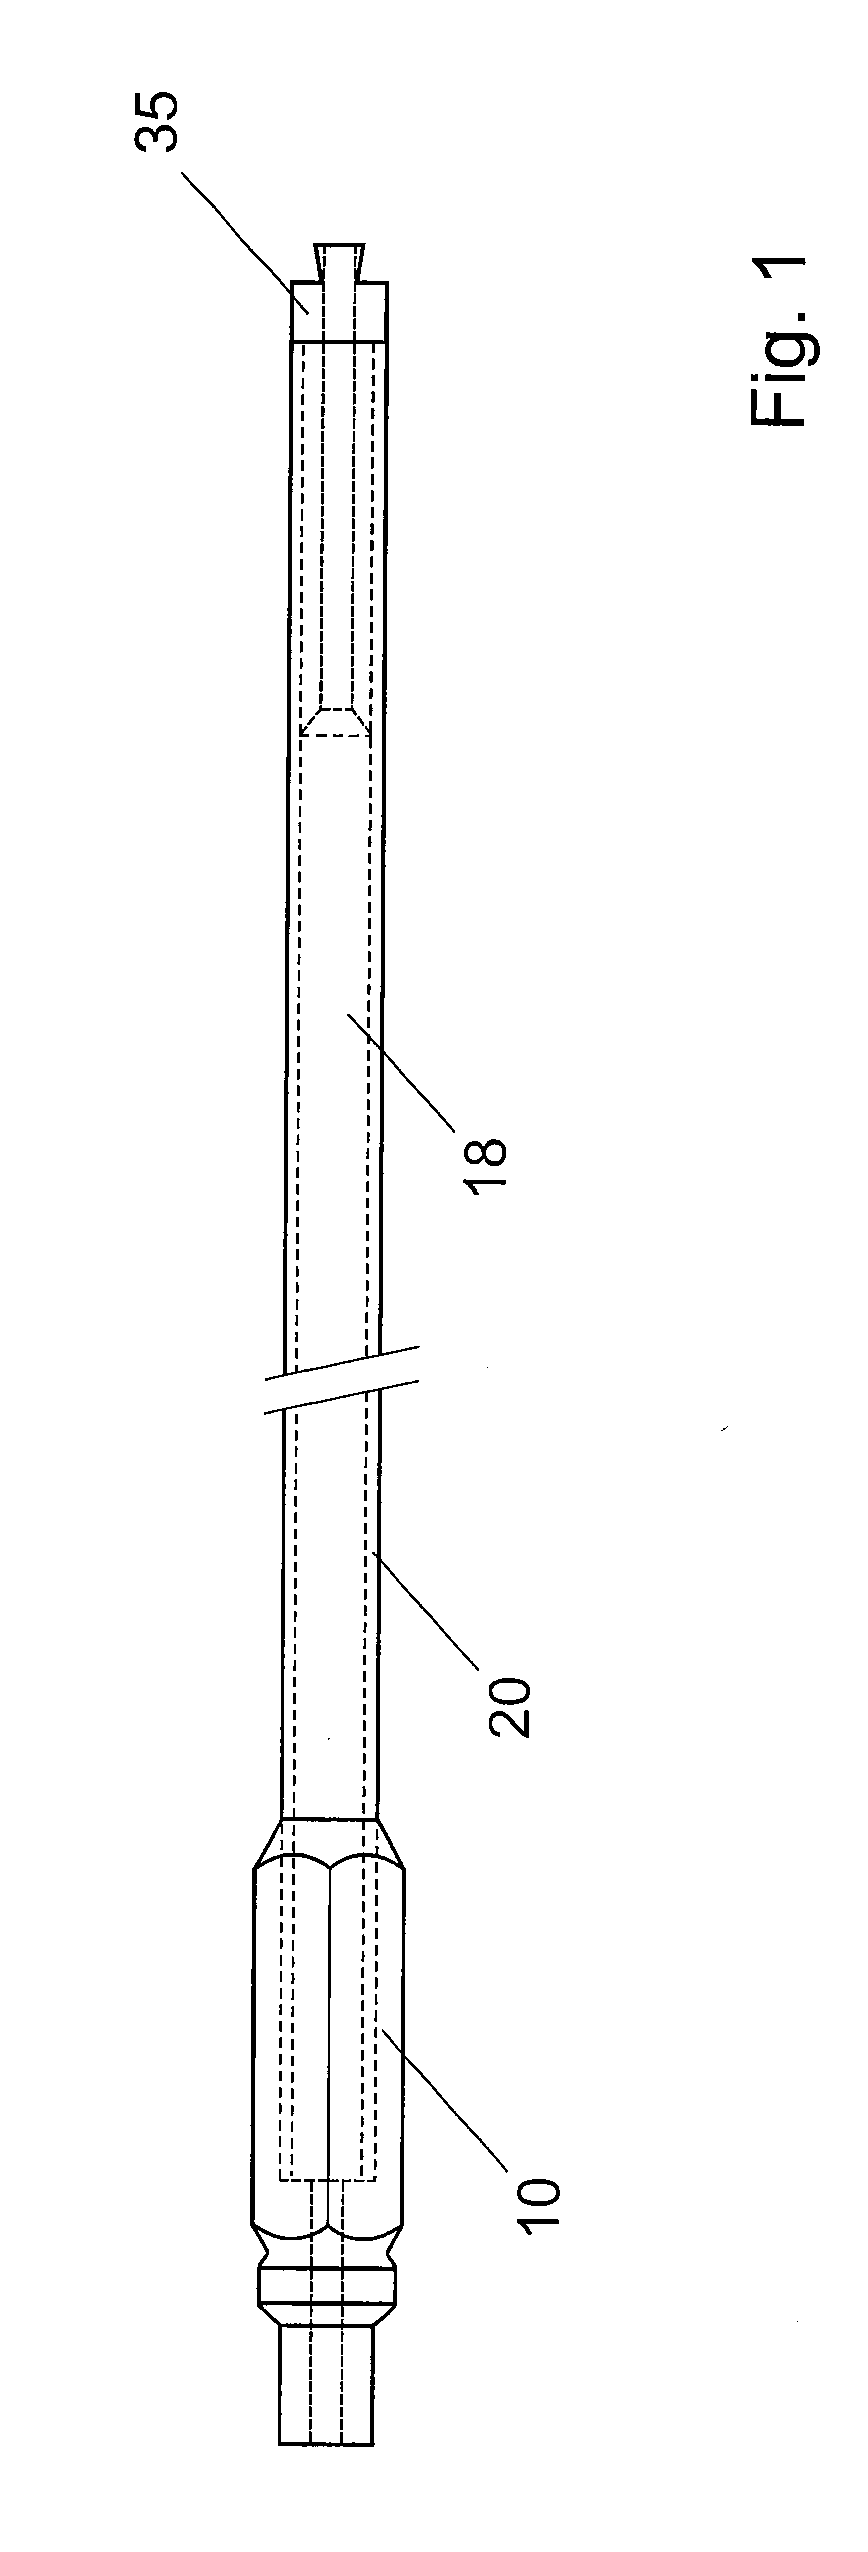 Drive shaft for a surgical reamer